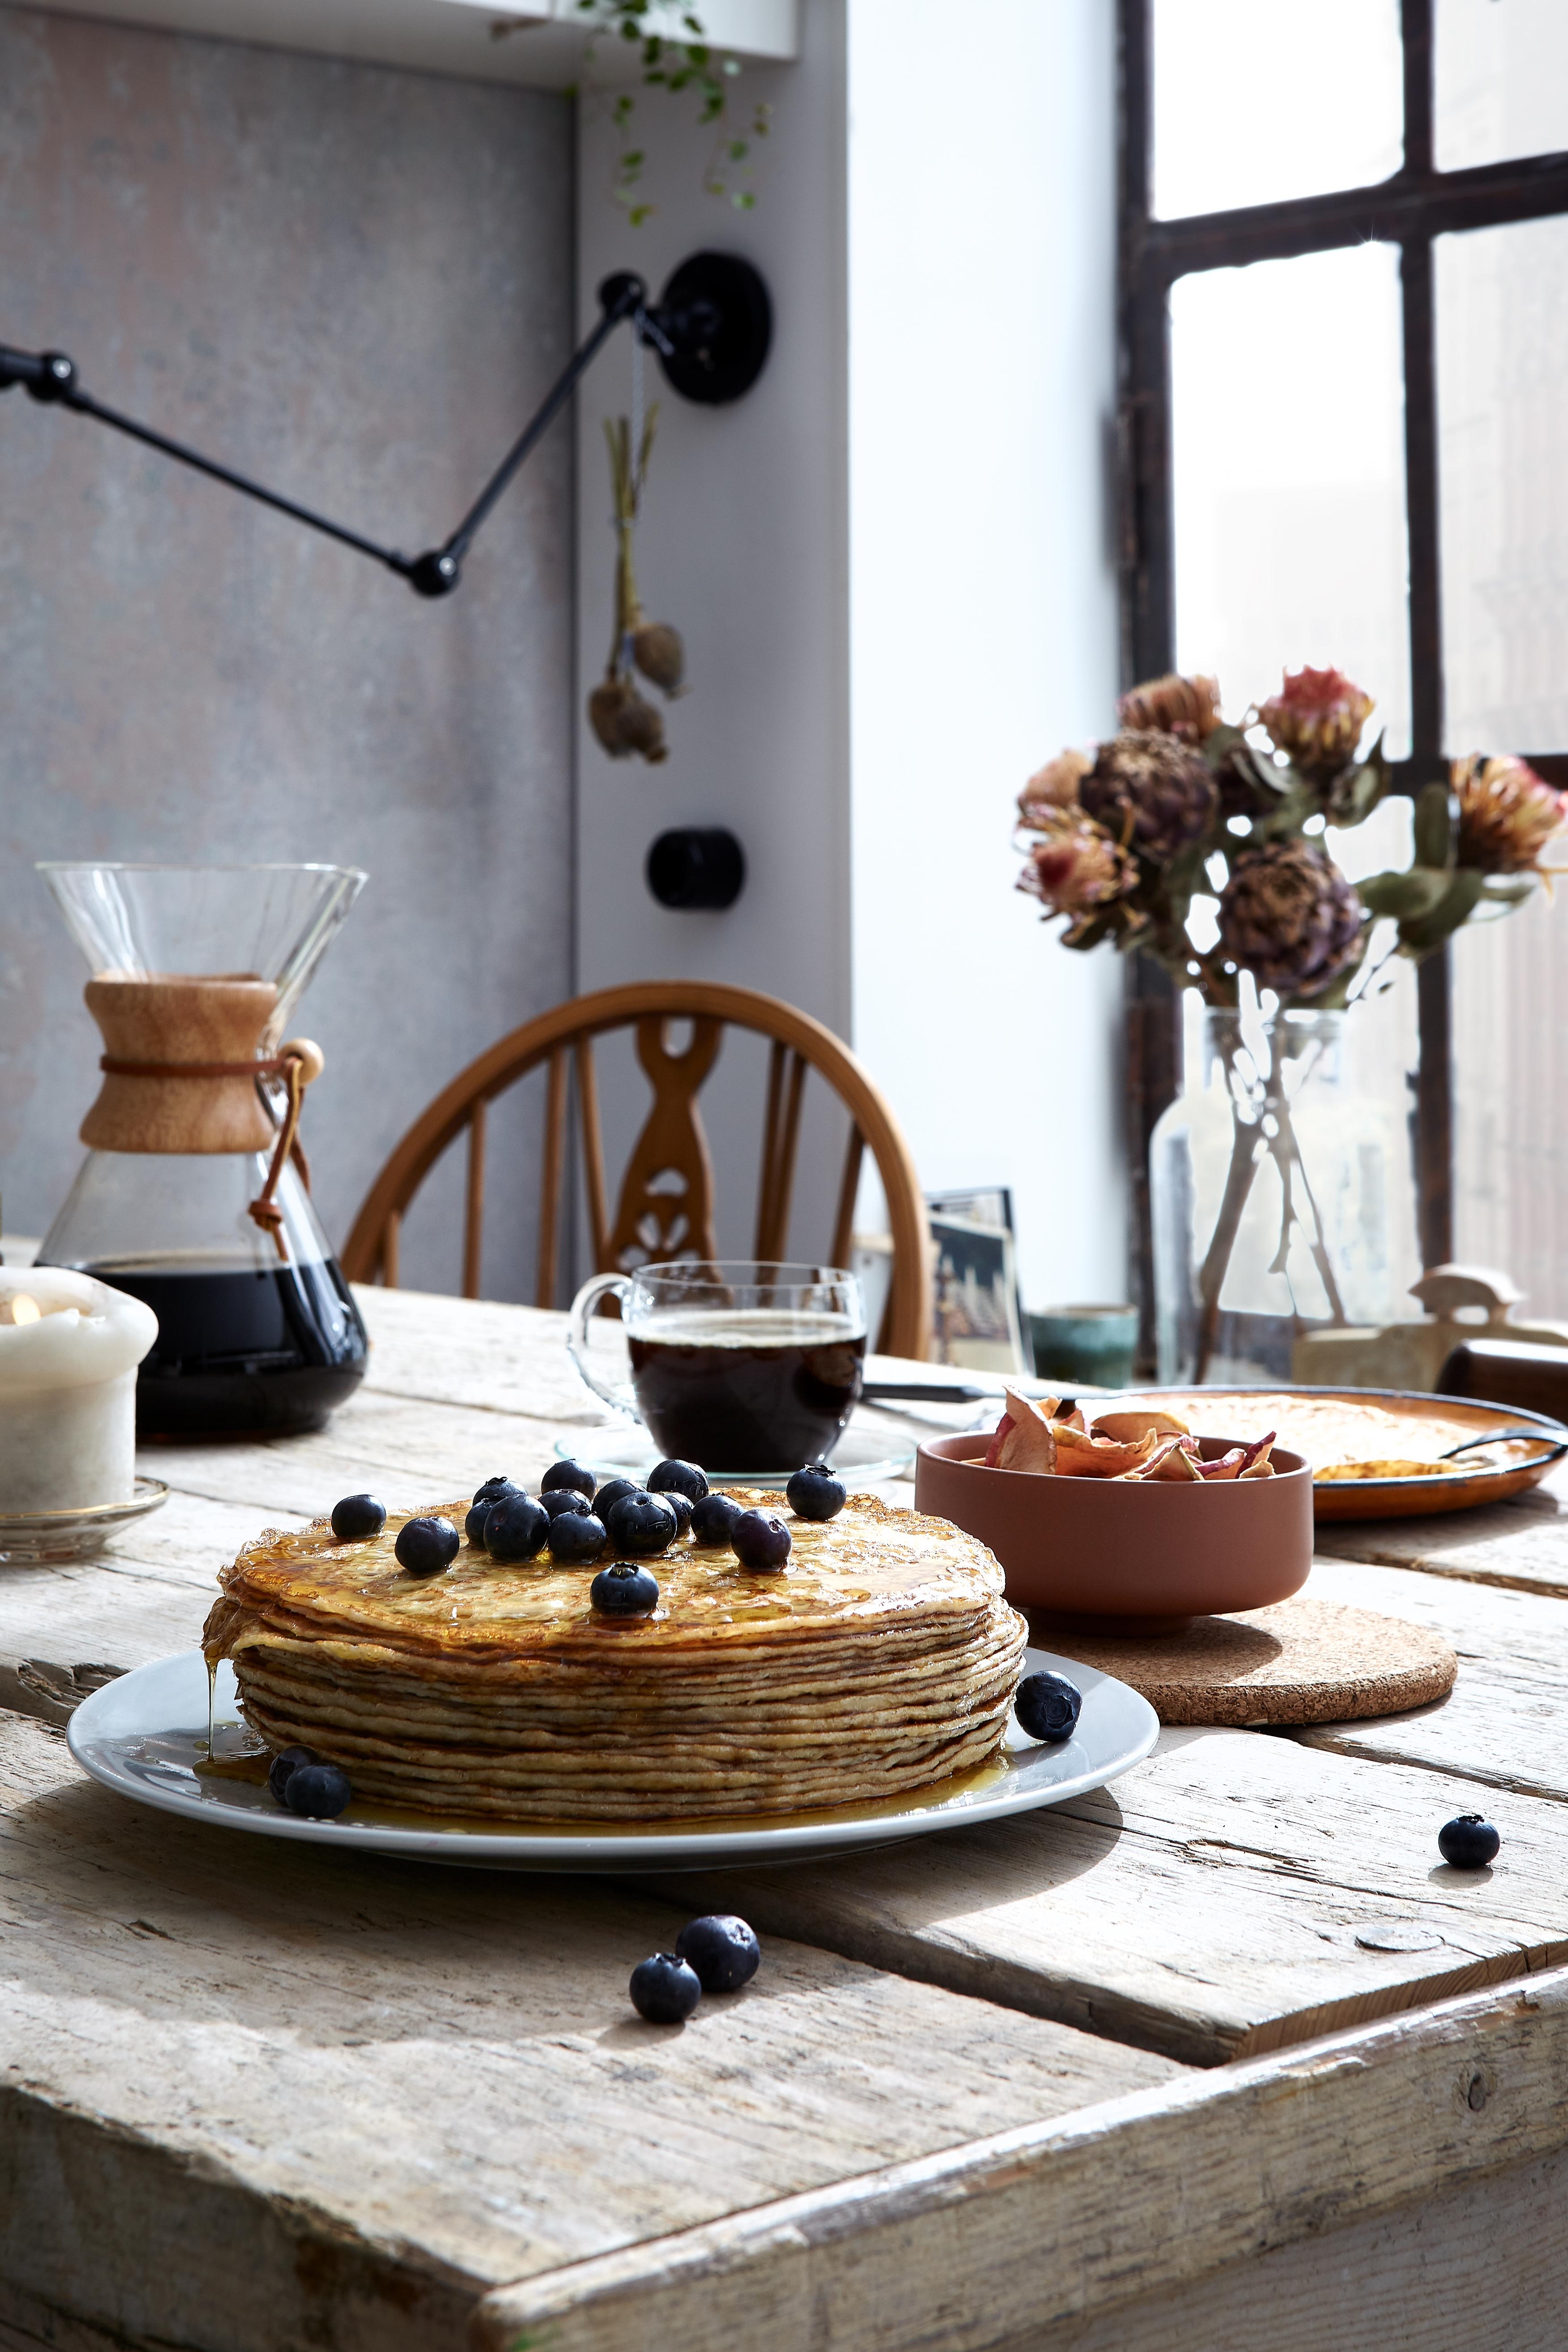 #food #foodphotography #foodstyling #styling #pancakes #interior #interiorstyling #cozy with @jamieboecker_photography